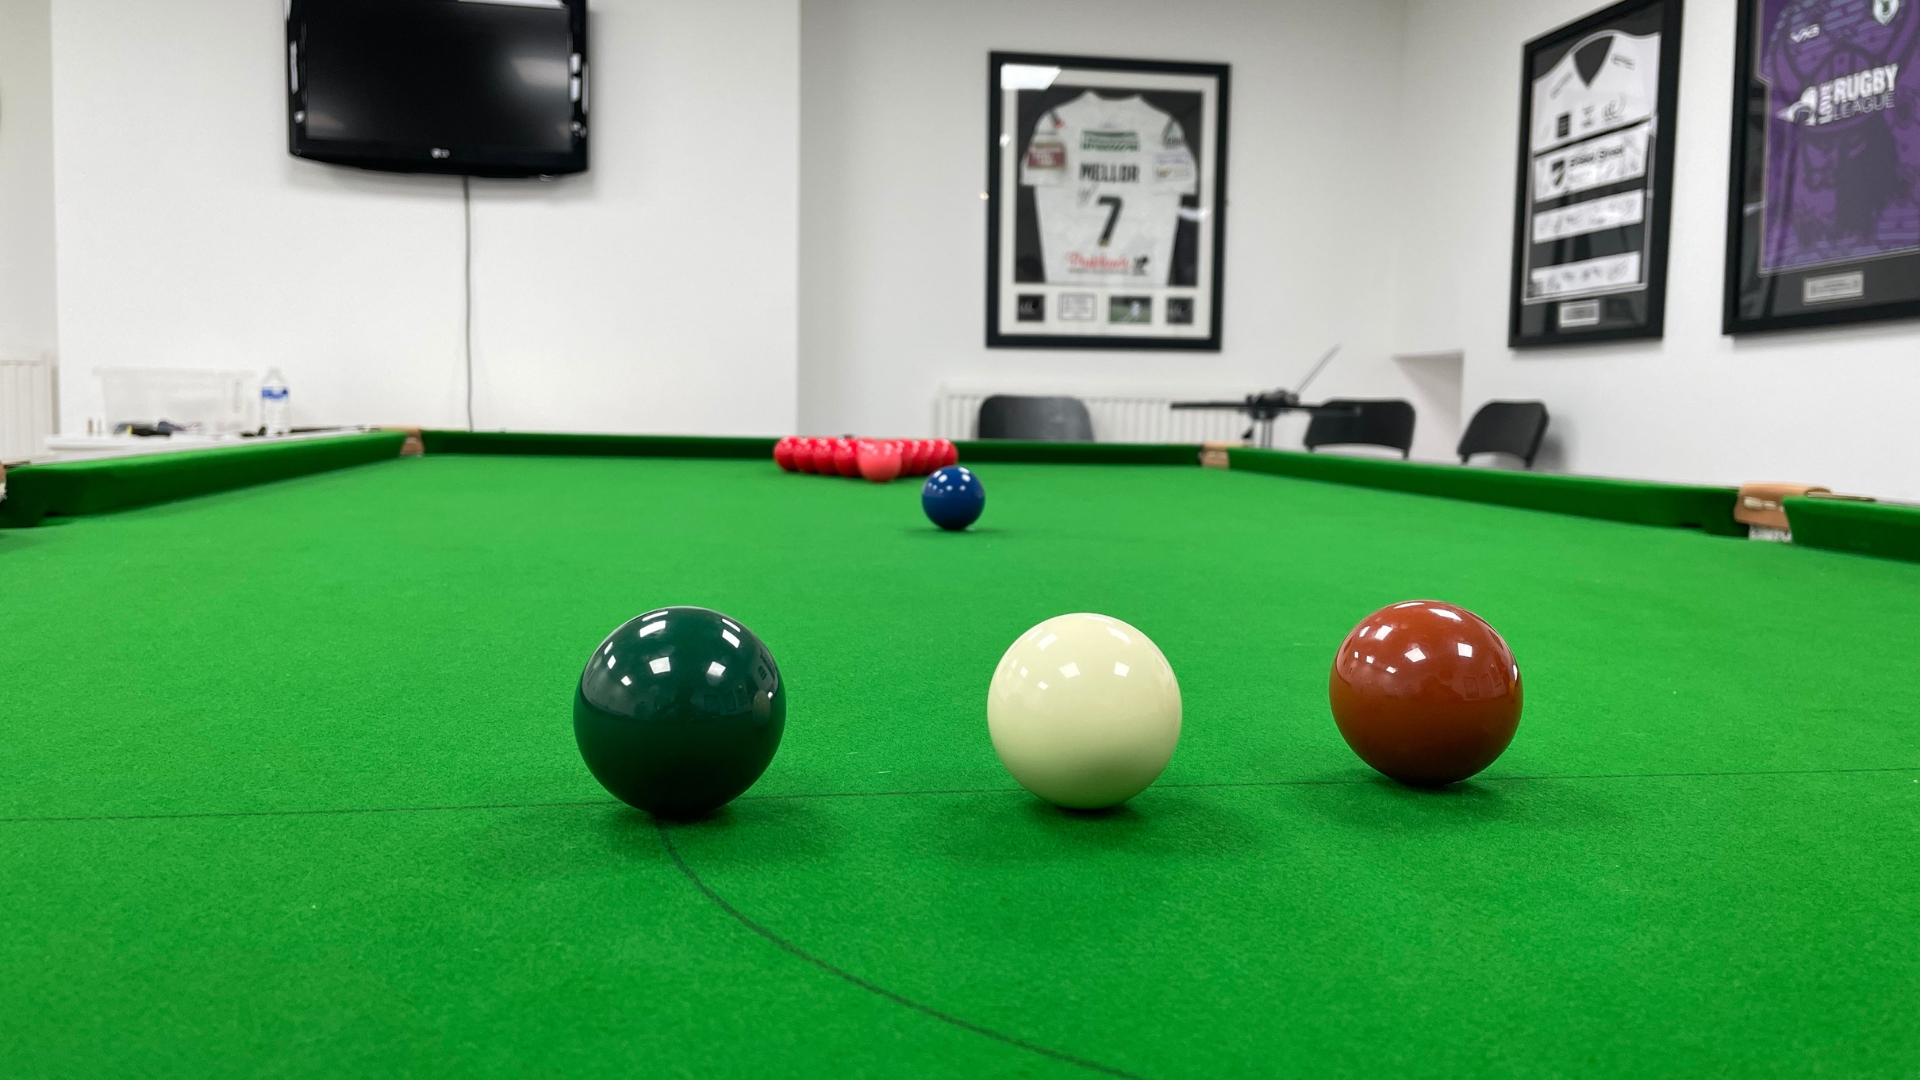 Coaching: What to focus on when playing snooker